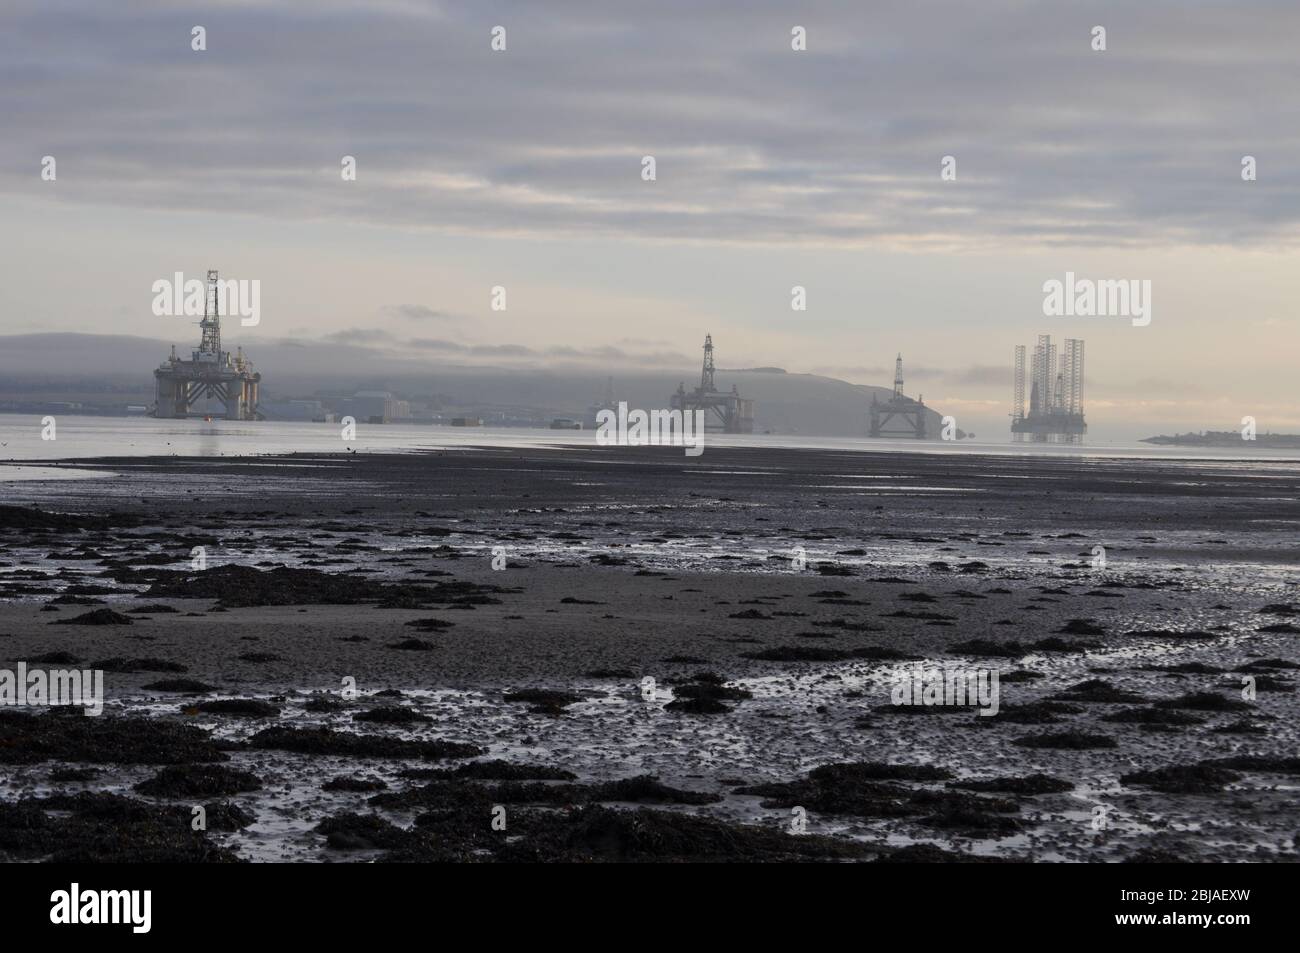 Oil Rigs in the Cromarty Firth, Scotland viewed from Balblair Stock Photo